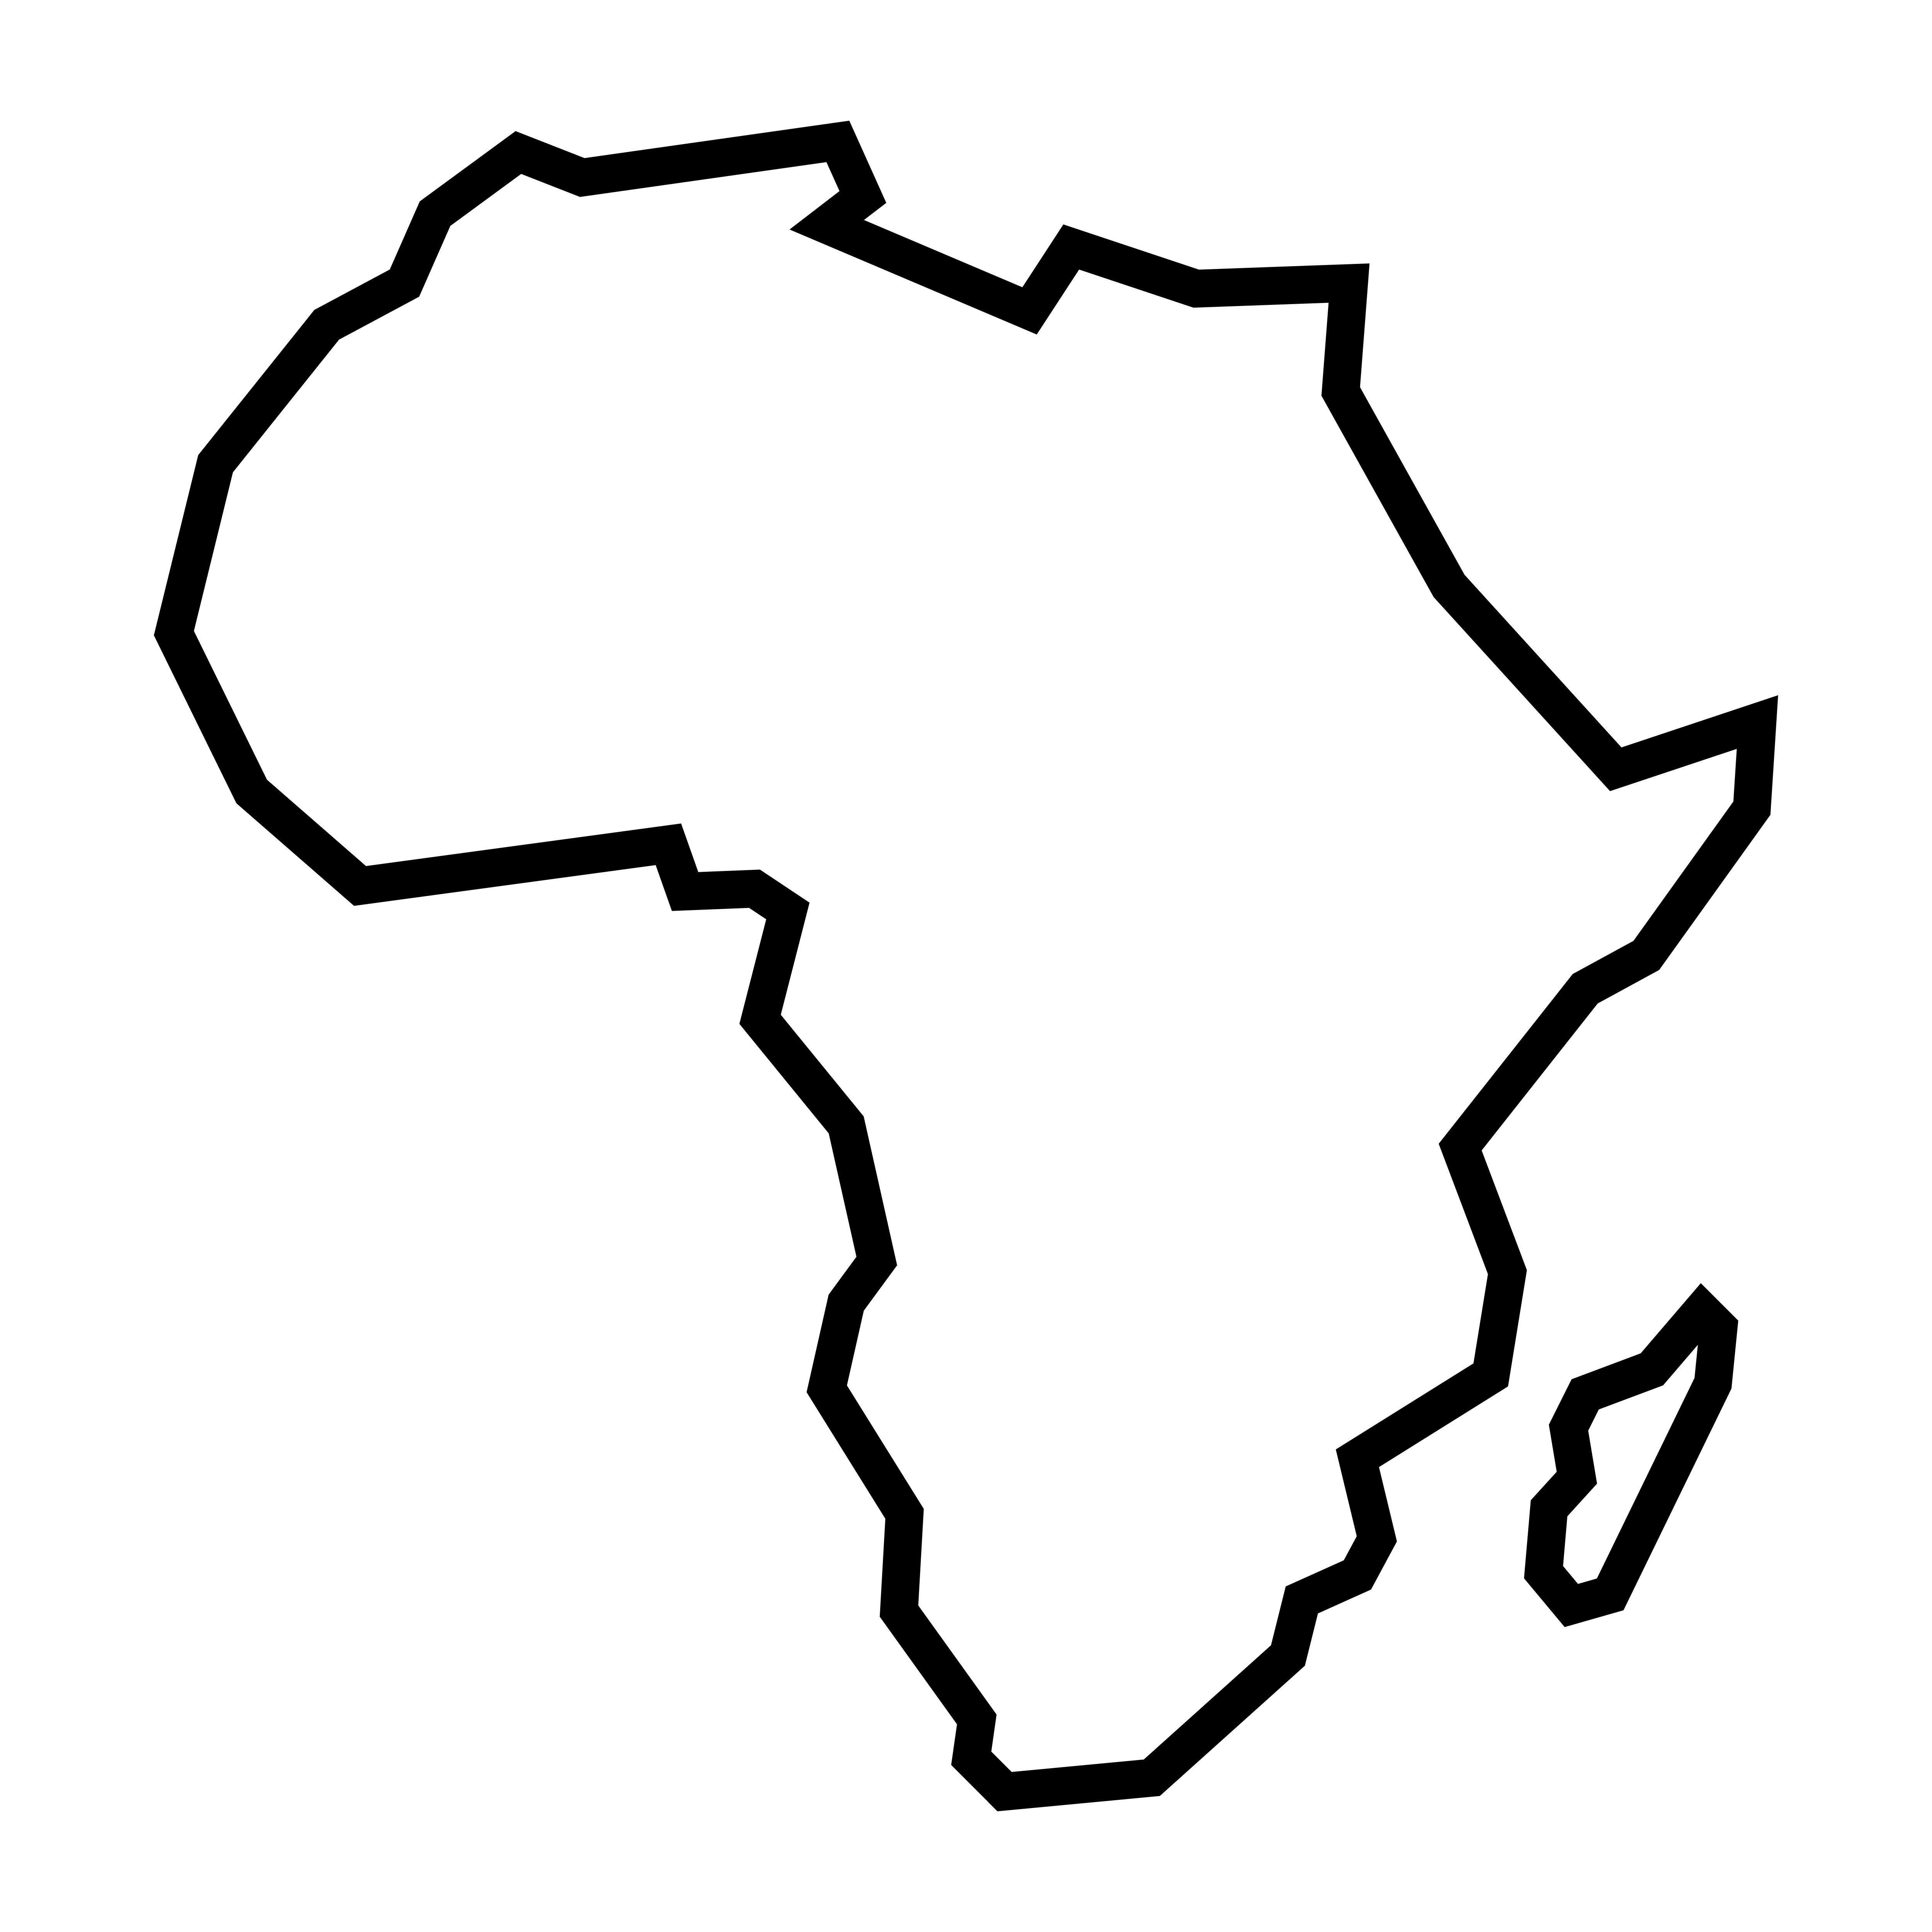 Africa continent outline.